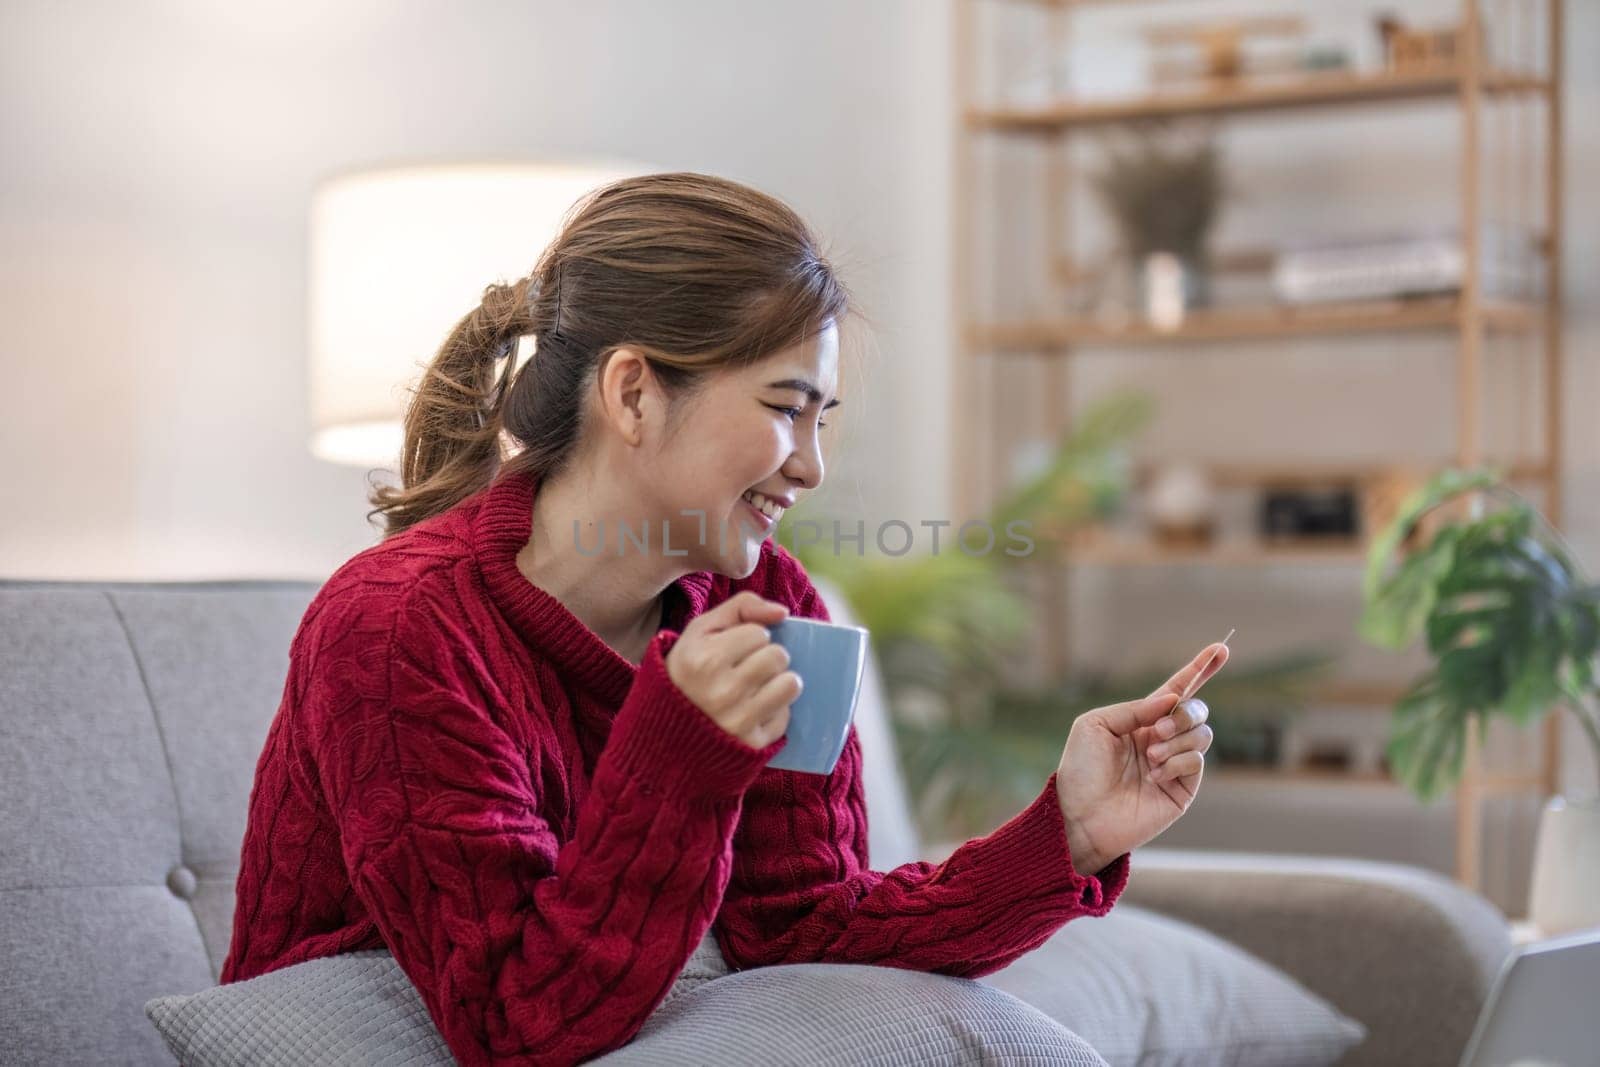 online shopping. Woman buying laptop using credit card sitting on sofa at home.